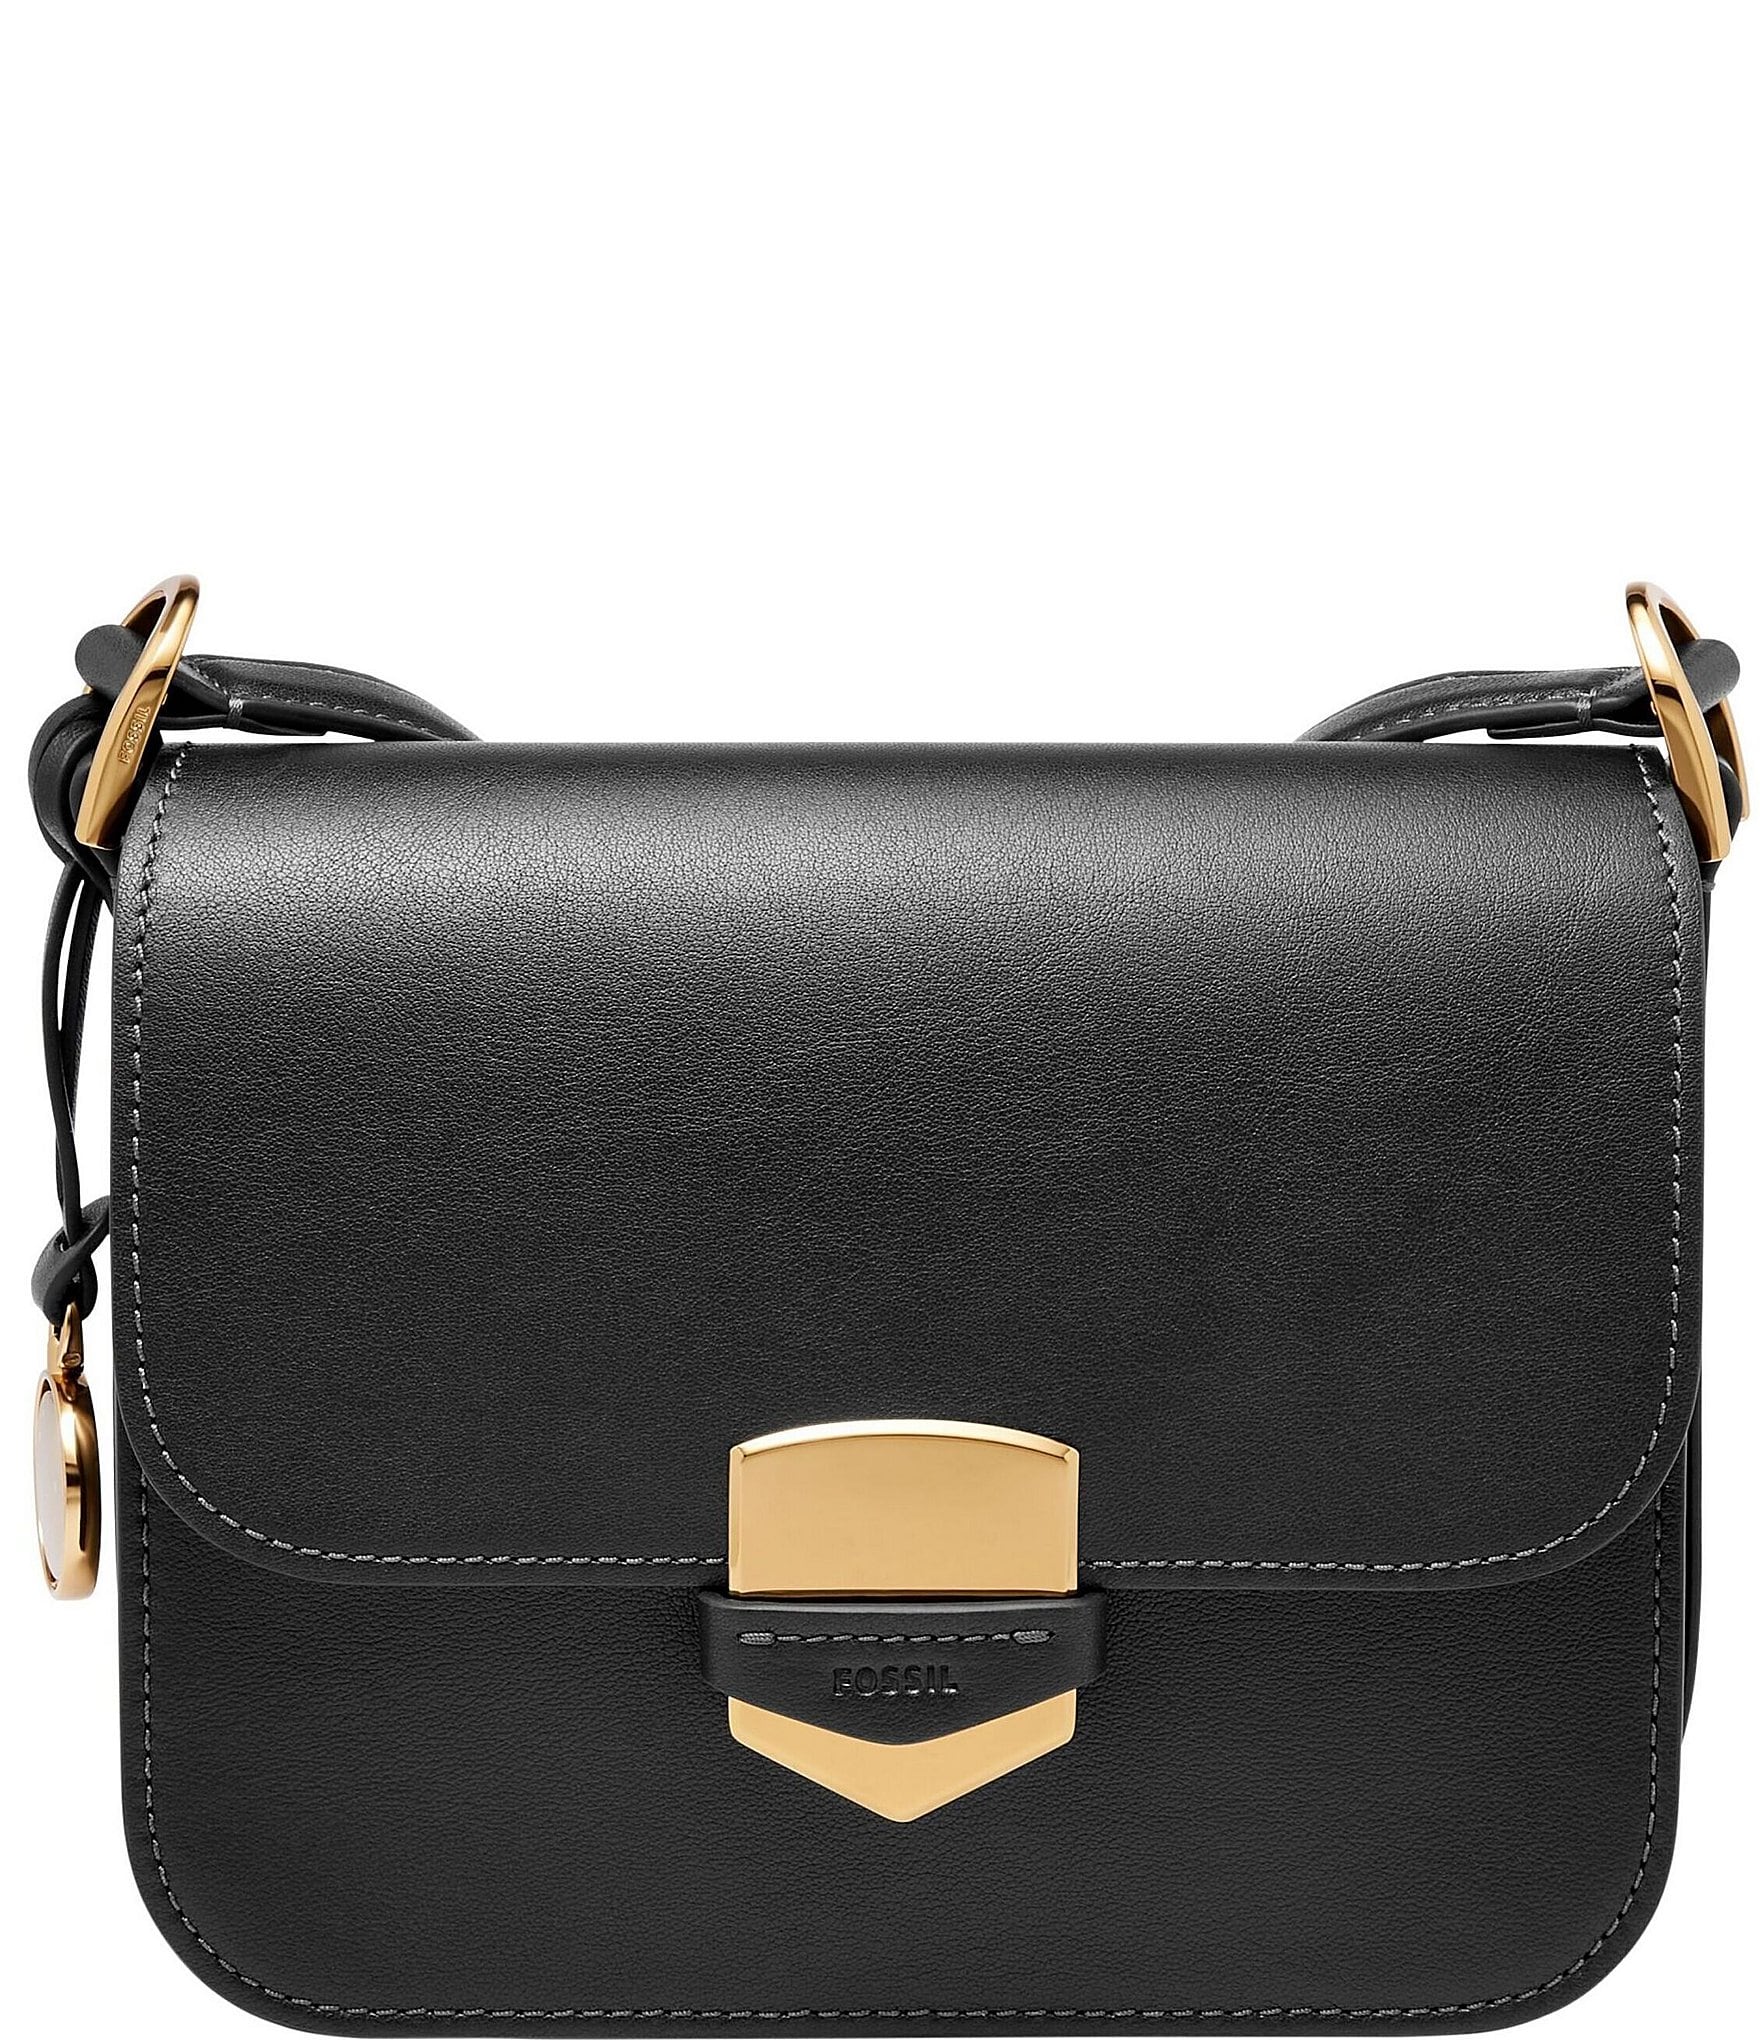 FOSSIL Vintage Frame Pouch Black | Buy bags, purses & accessories online |  modeherz